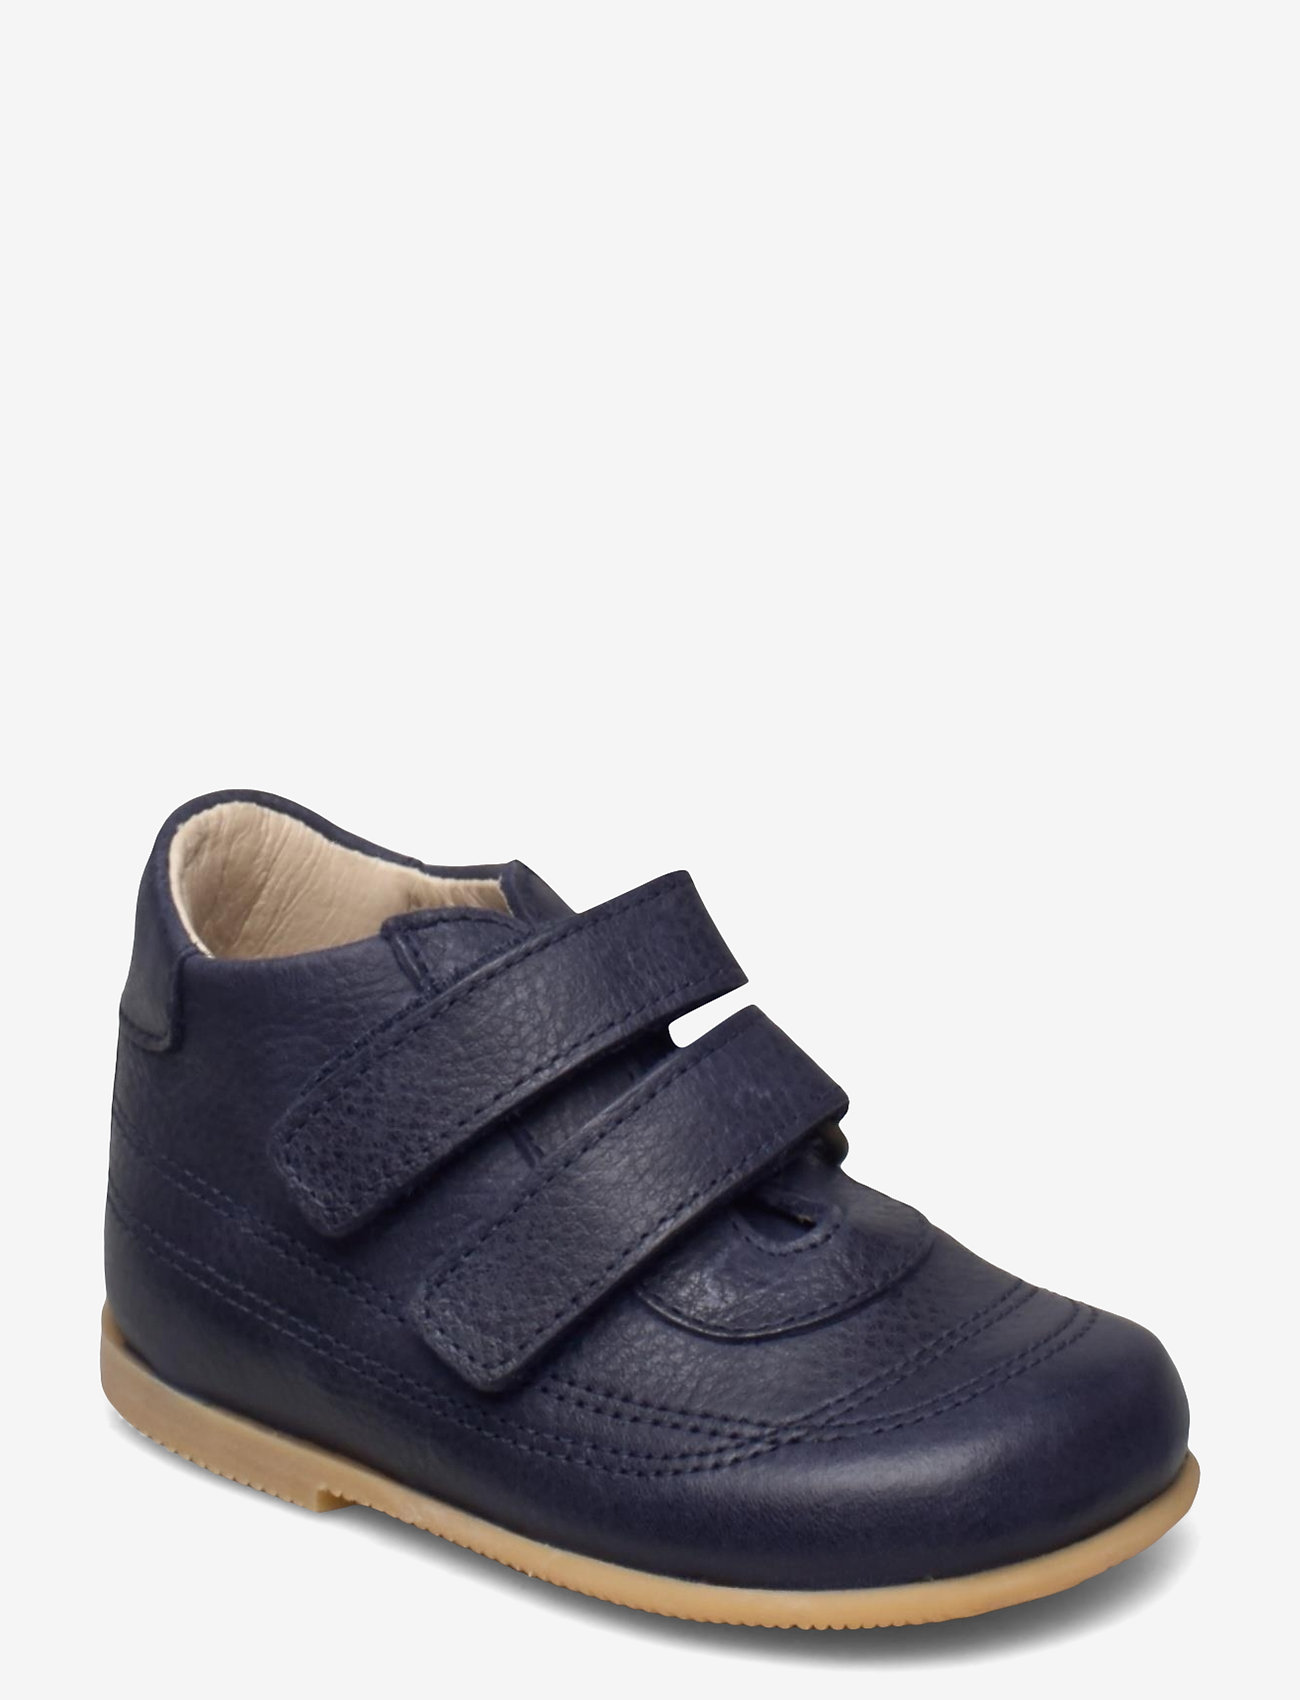 Arauto RAP - Hand made low boot - kinder - navy - 1